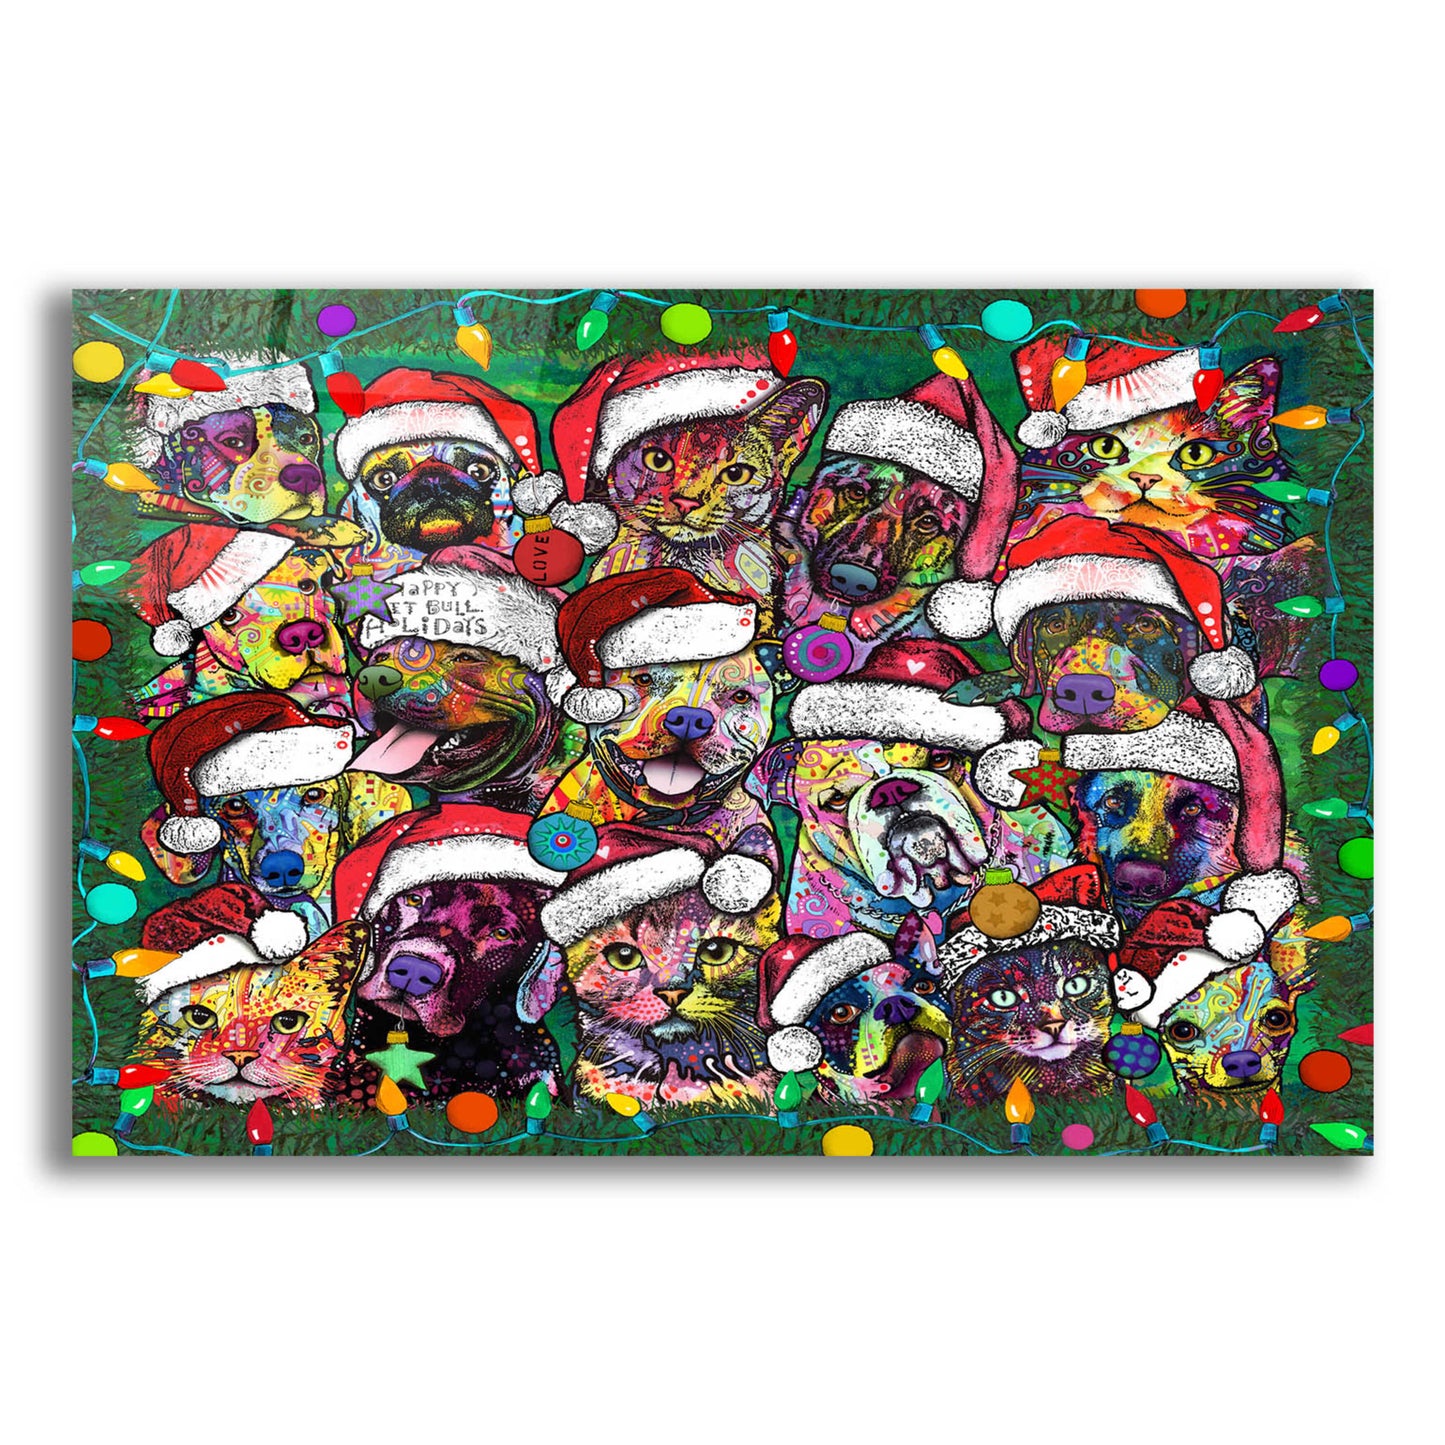 Epic Art 'Christmas Collage' by Dean Russo, Acrylic Glass Wall Art,16x12